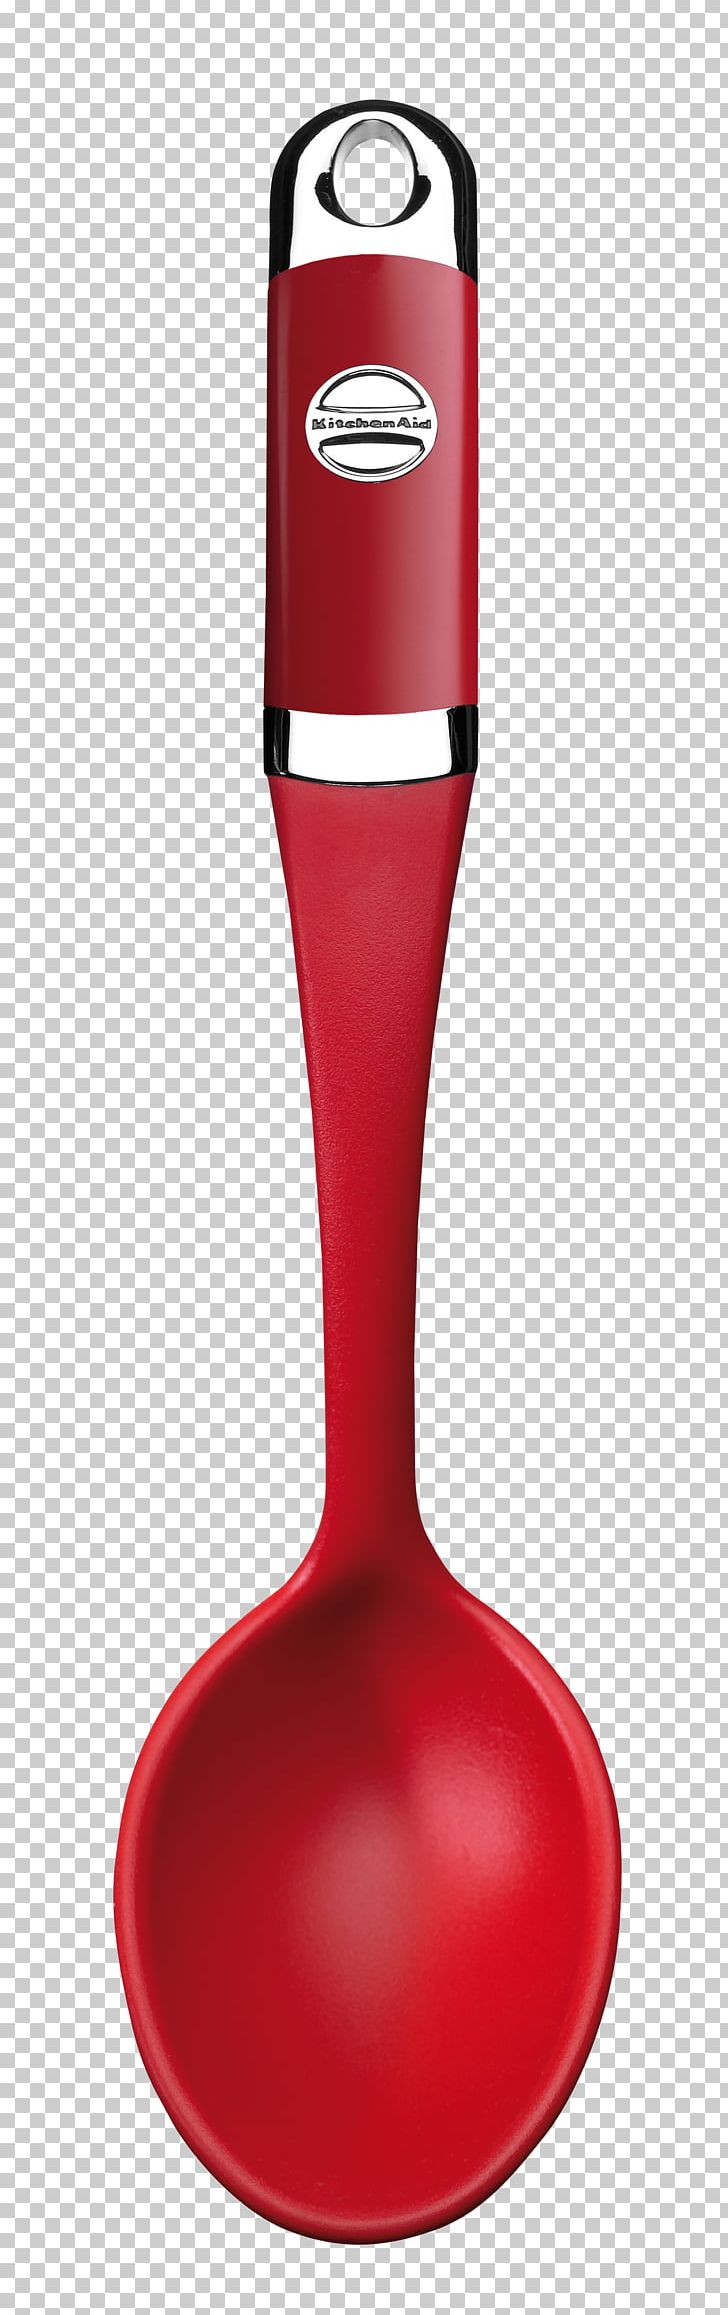 Slotted Spoons Skimmer KitchenAid PNG, Clipart, Caixa Economica Federal, Cutlery, Kitchen, Kitchenaid, Kitchen Utensil Free PNG Download